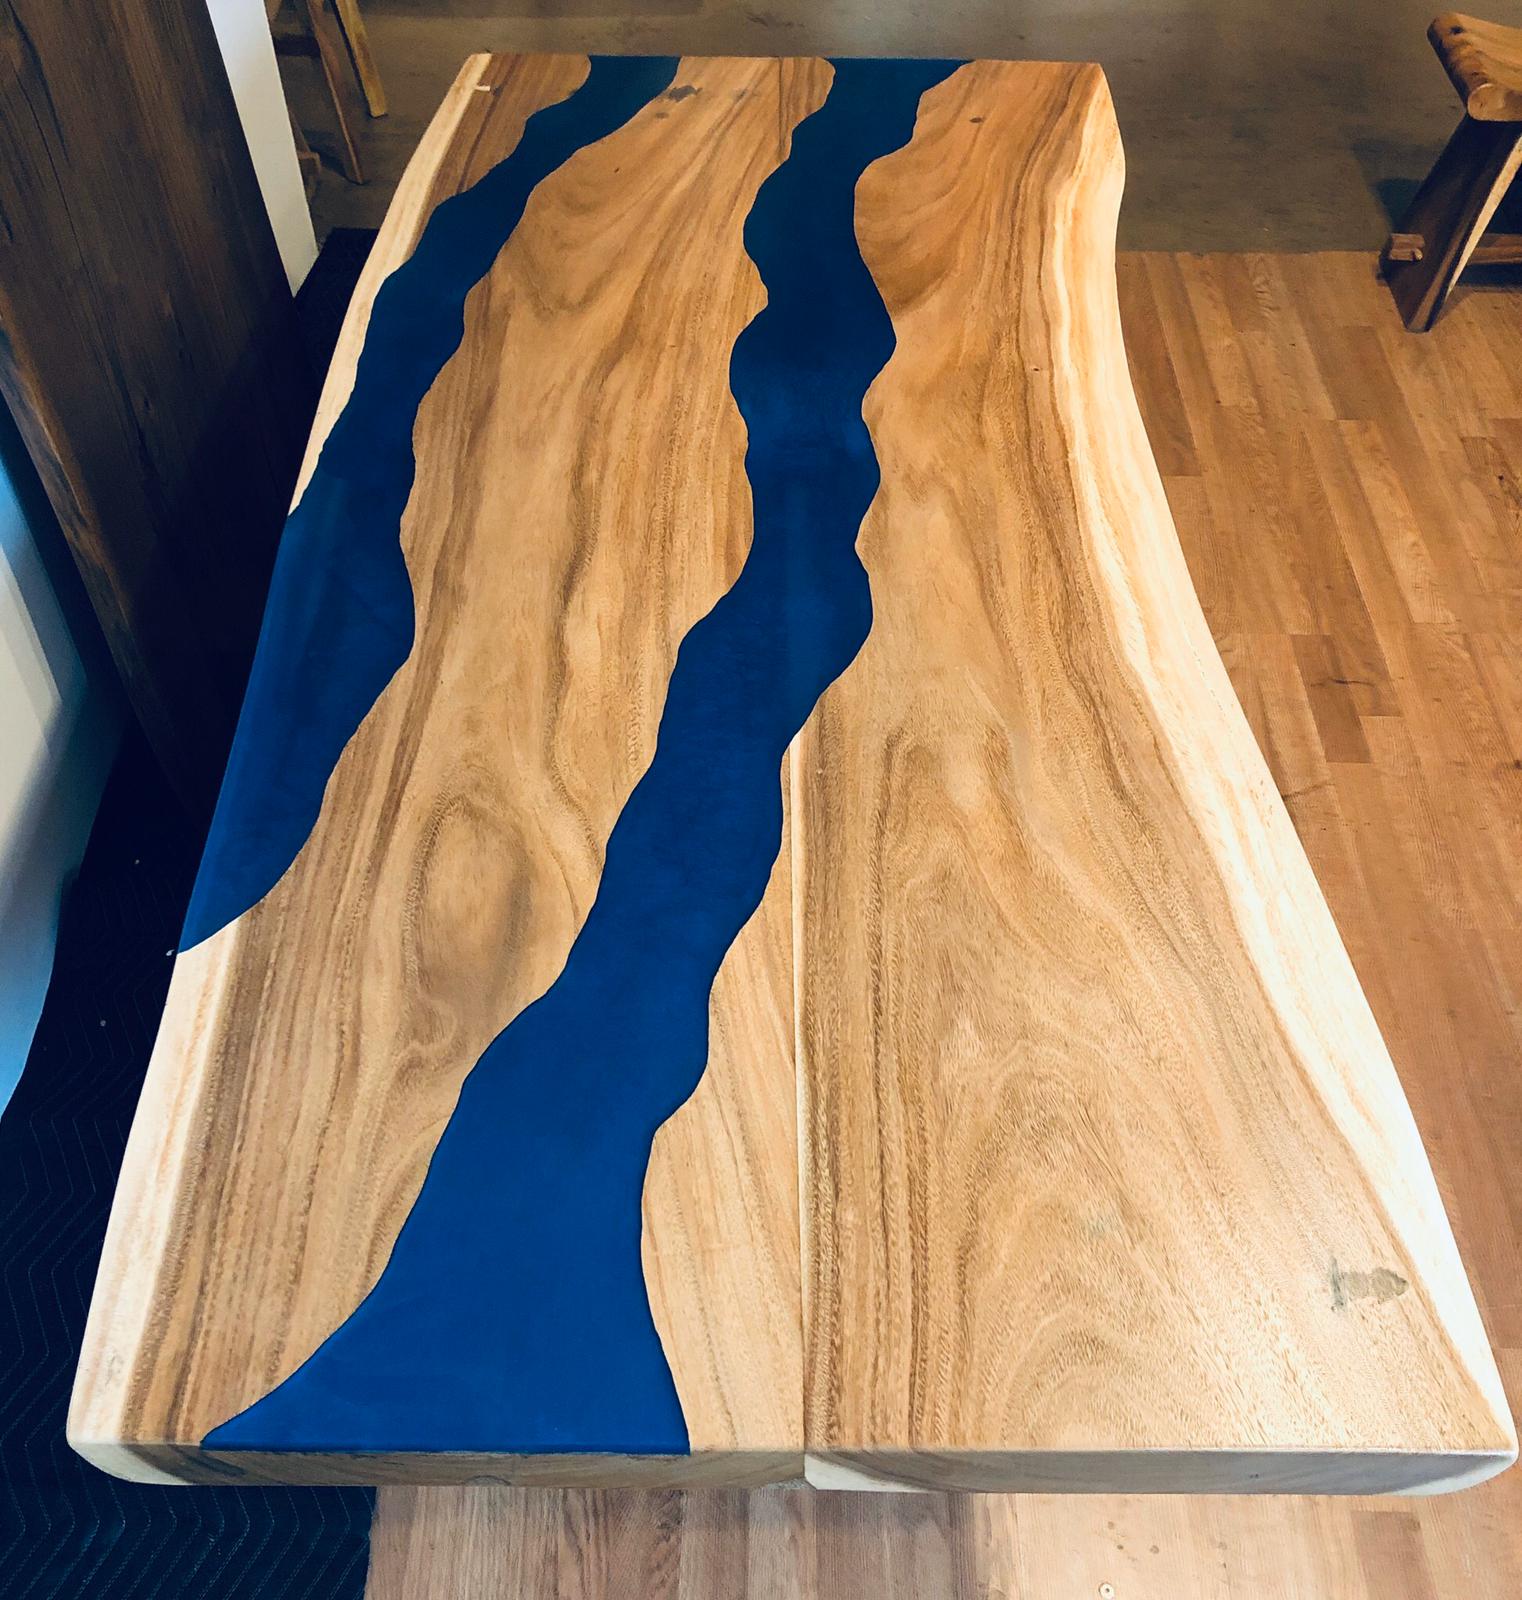 Live Edge Epoxy Resin Table Top / Made To Order by Gül Natural Furniture at  Washington Square Park, New York